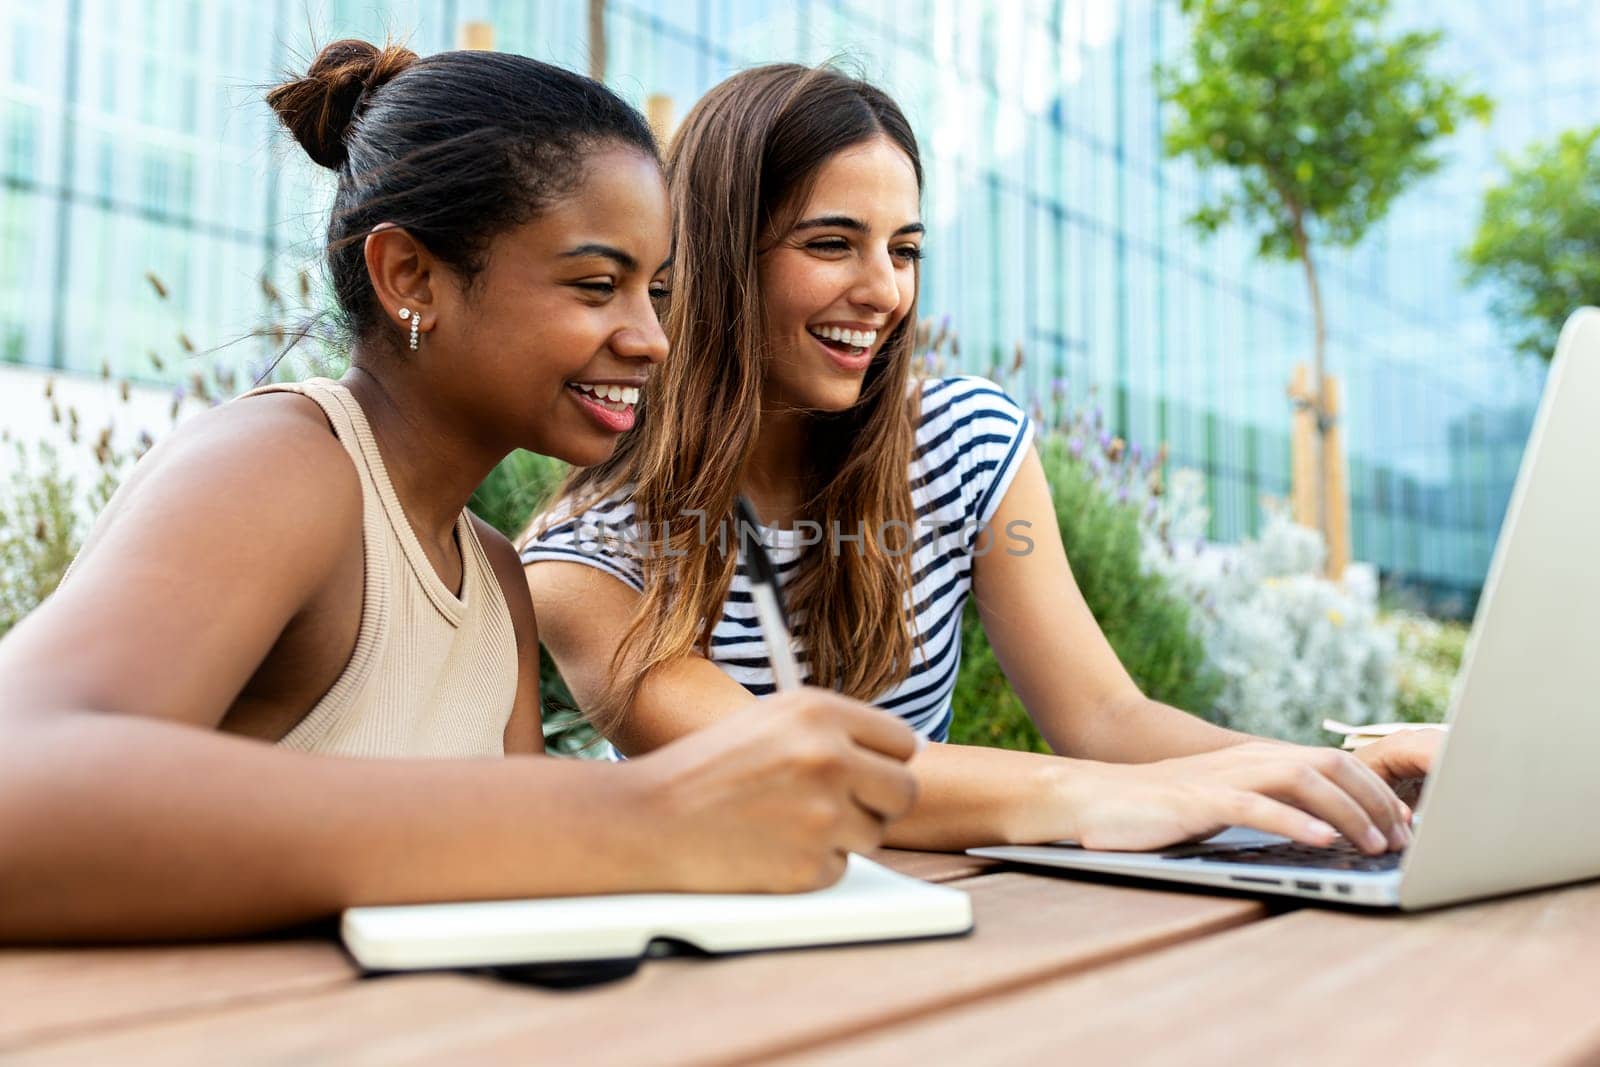 Two happy female college multiracial friends studying together in campus using laptop. Education and technology concept.